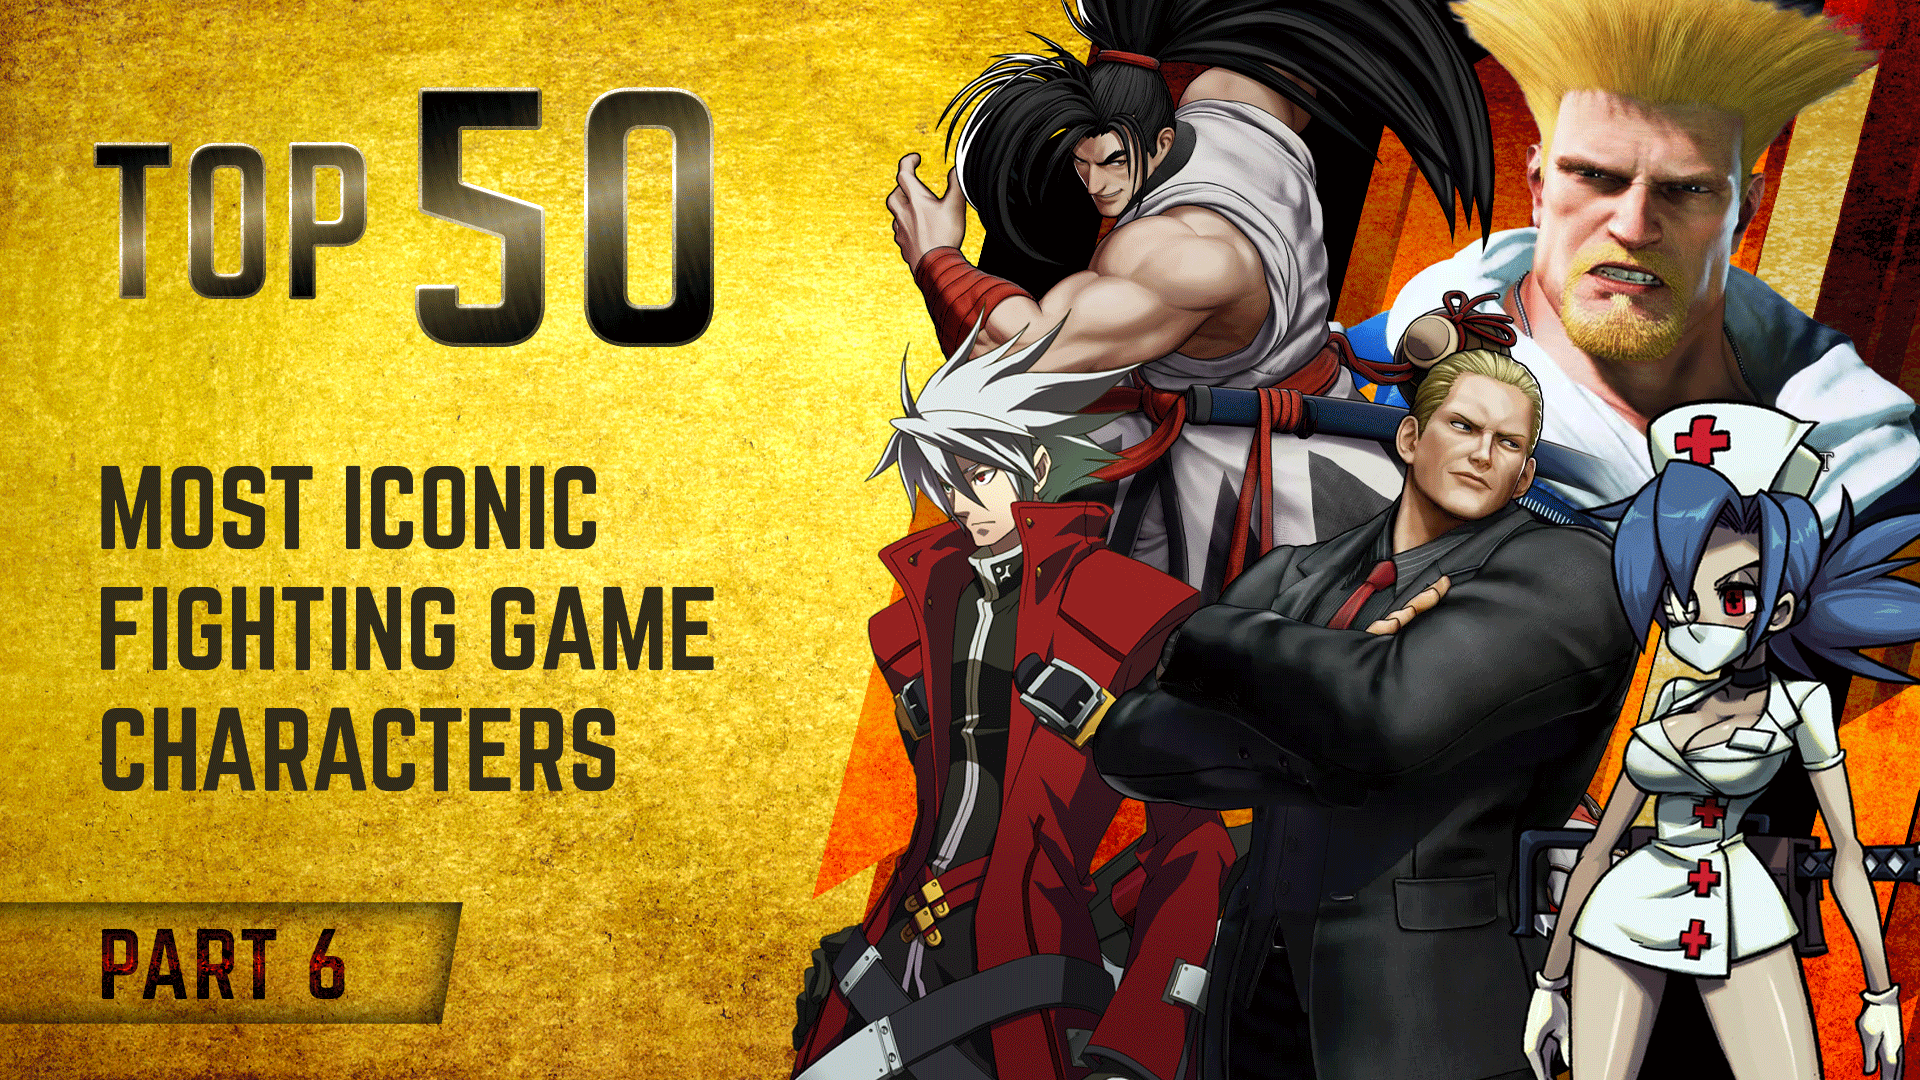 Top 50 Most Iconic Fighting Game Characters - Part 6